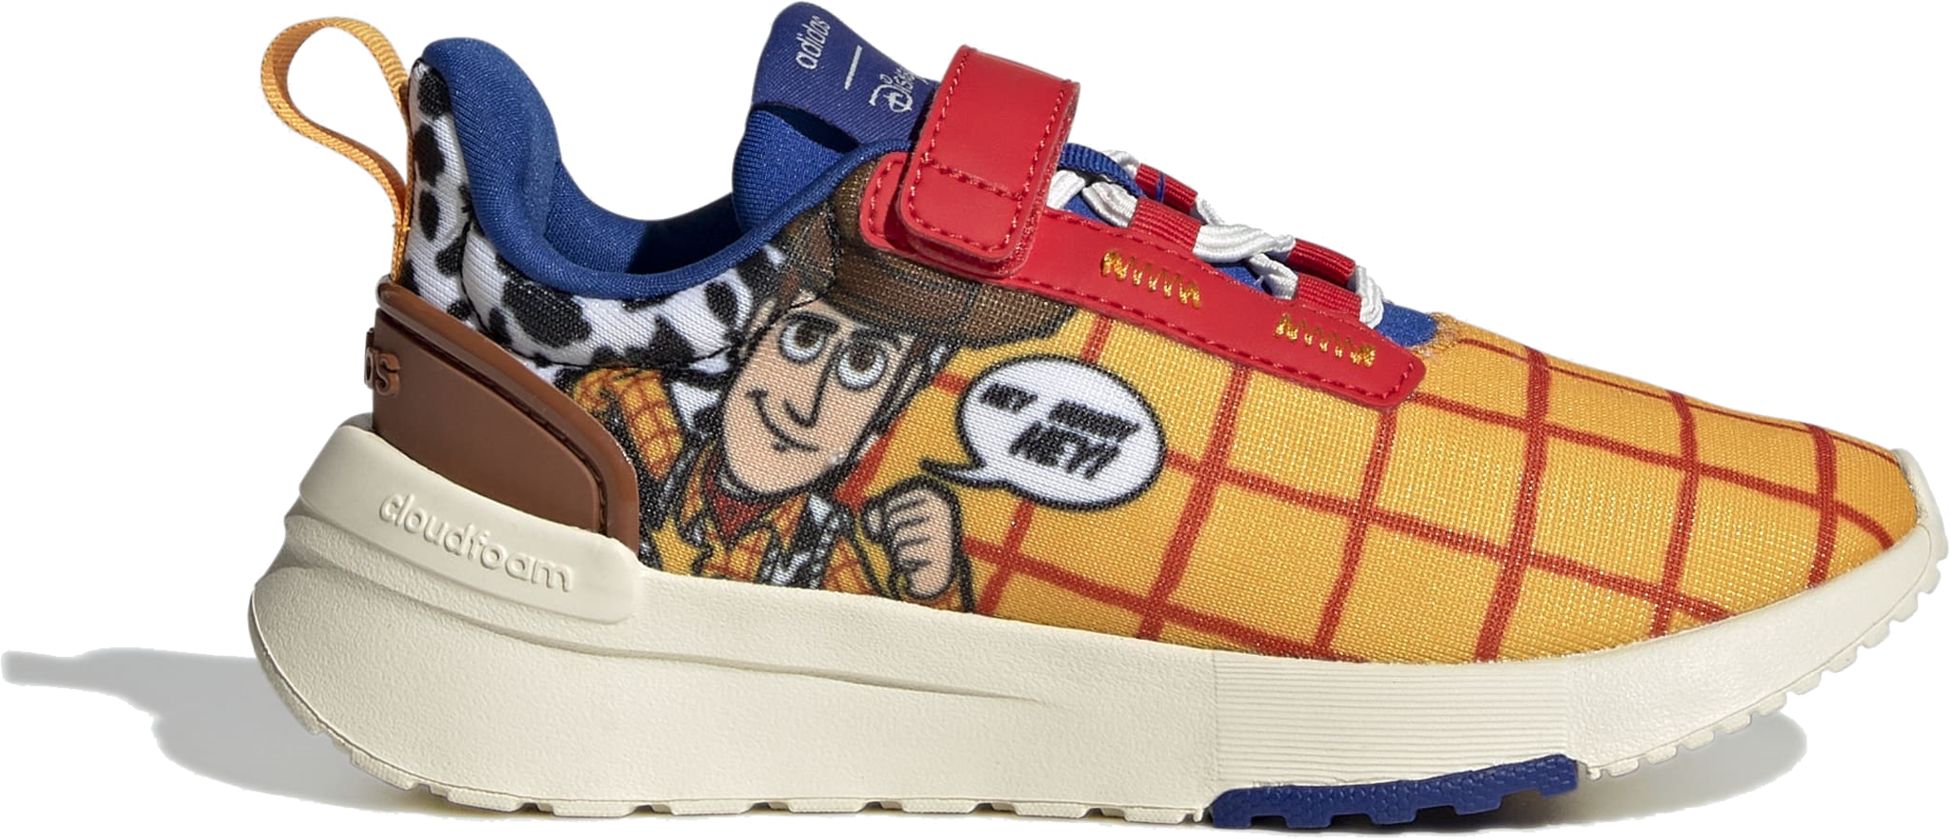 ADIDAS, adidas x Disney Racer TR21 Toy Story Woody Shoes